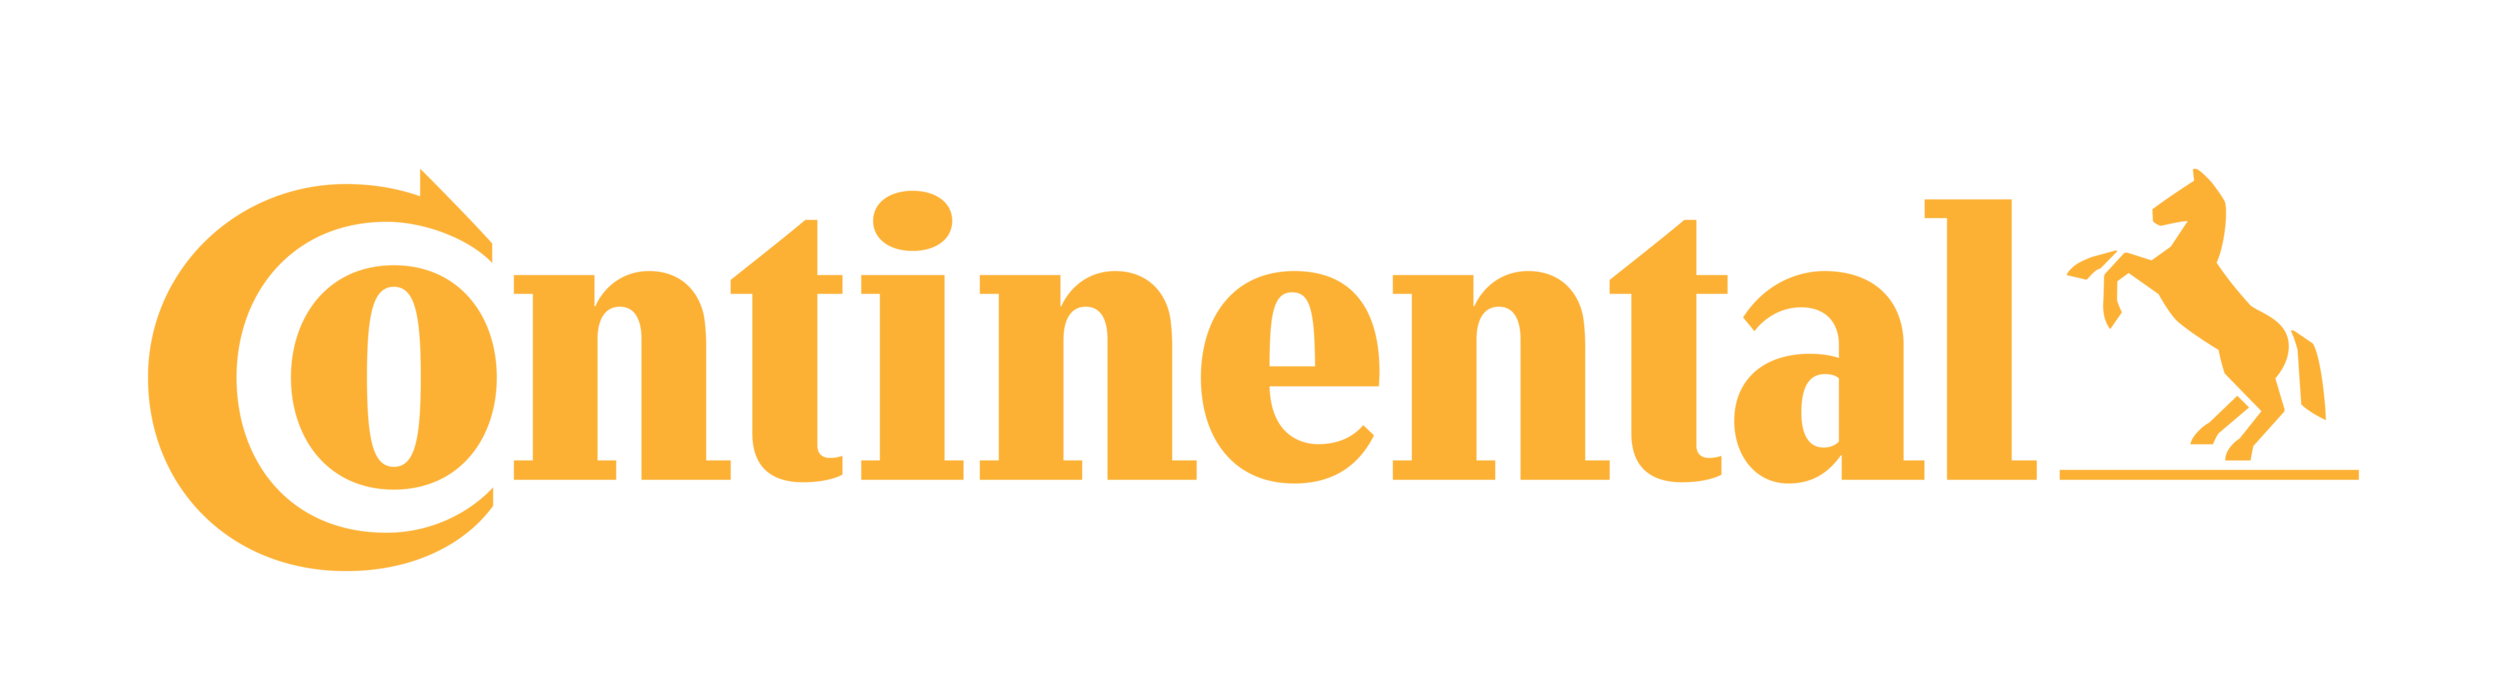 continental-logo-gold.png